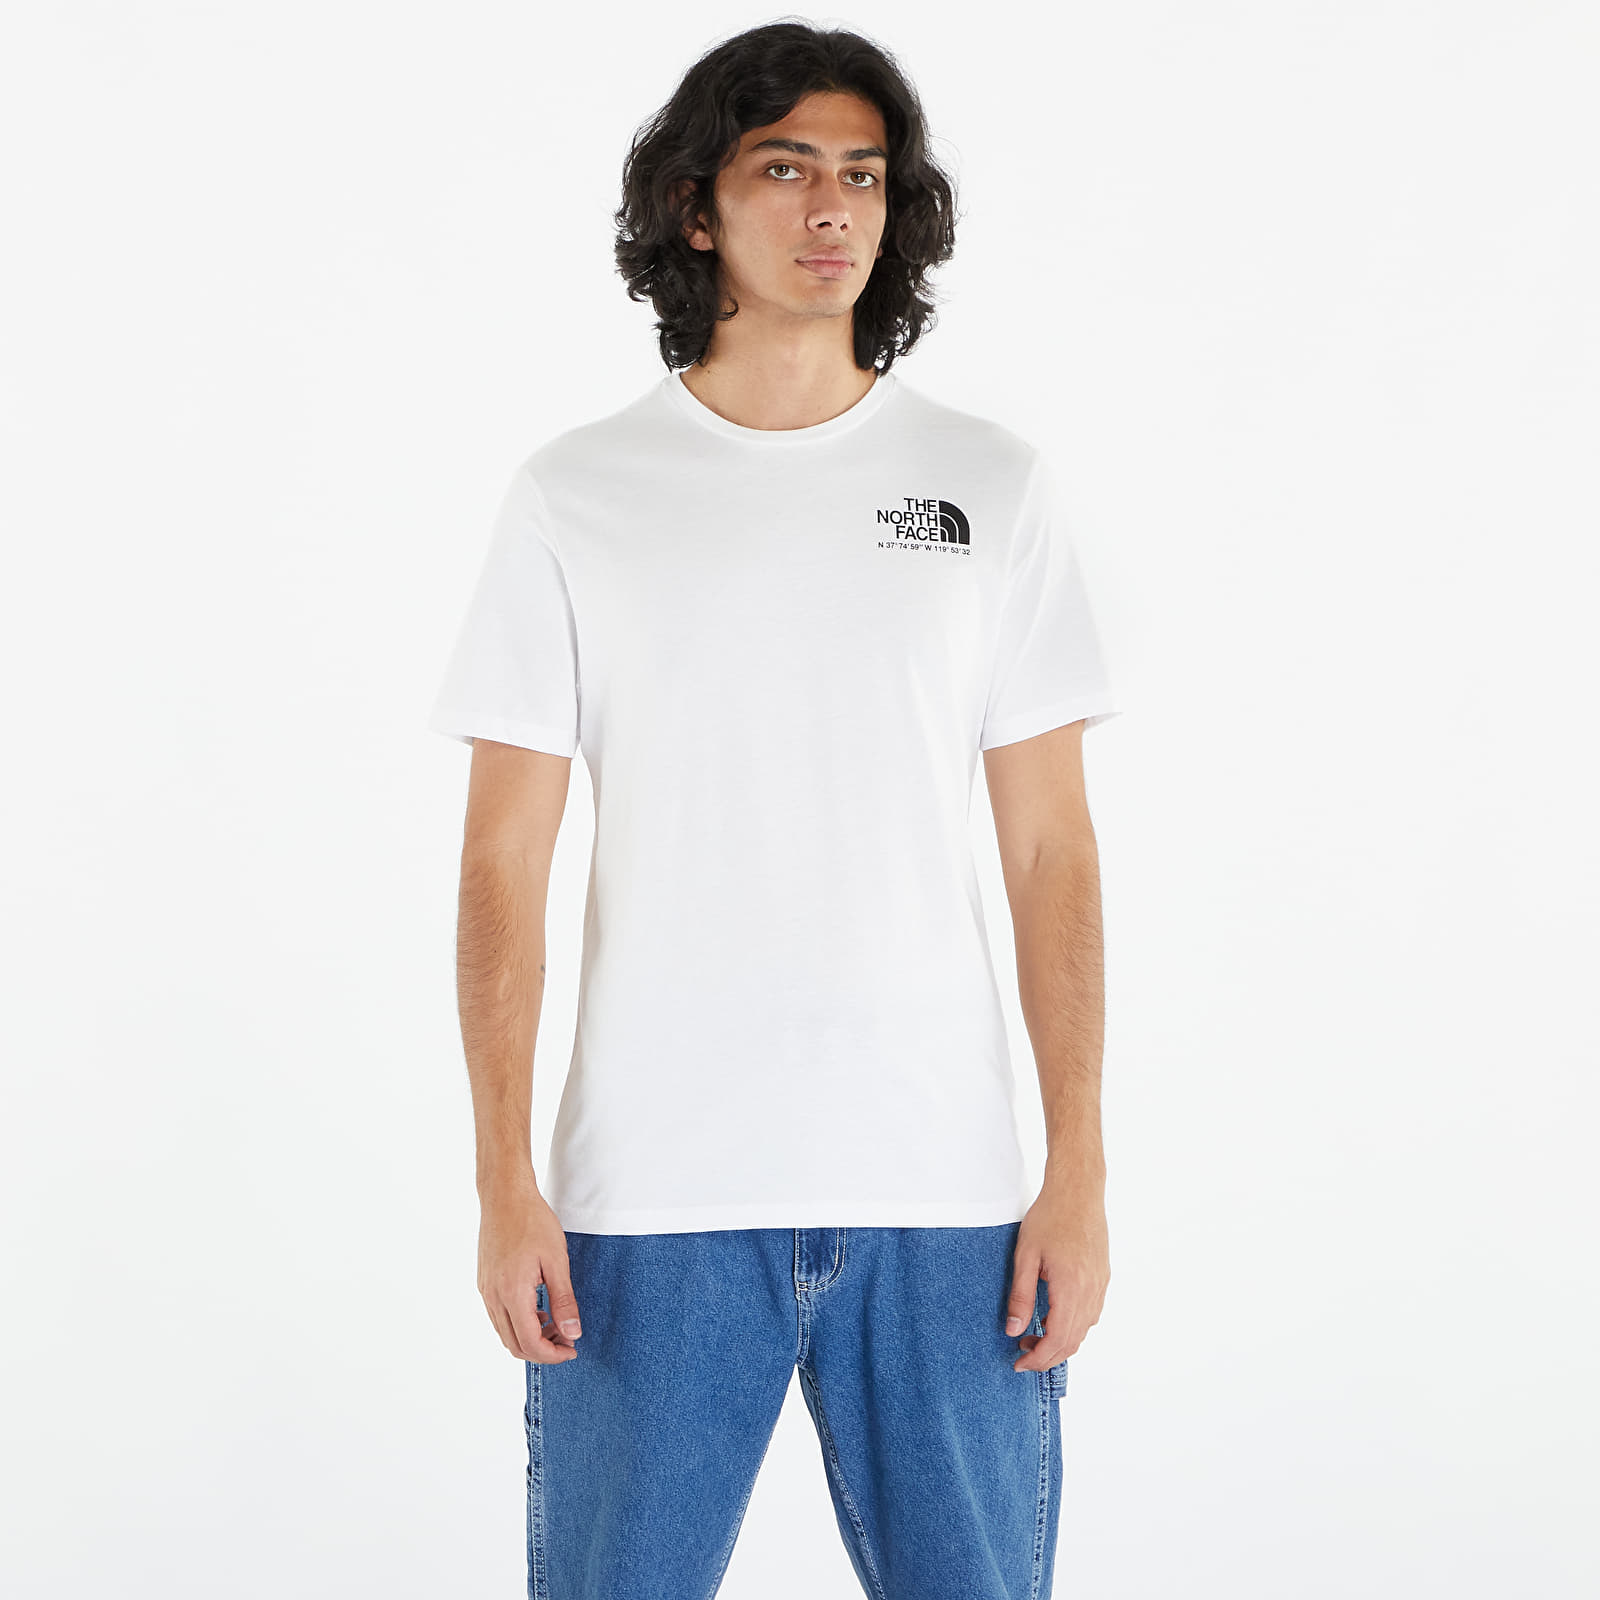 The North Face - coordinates tee tnf white